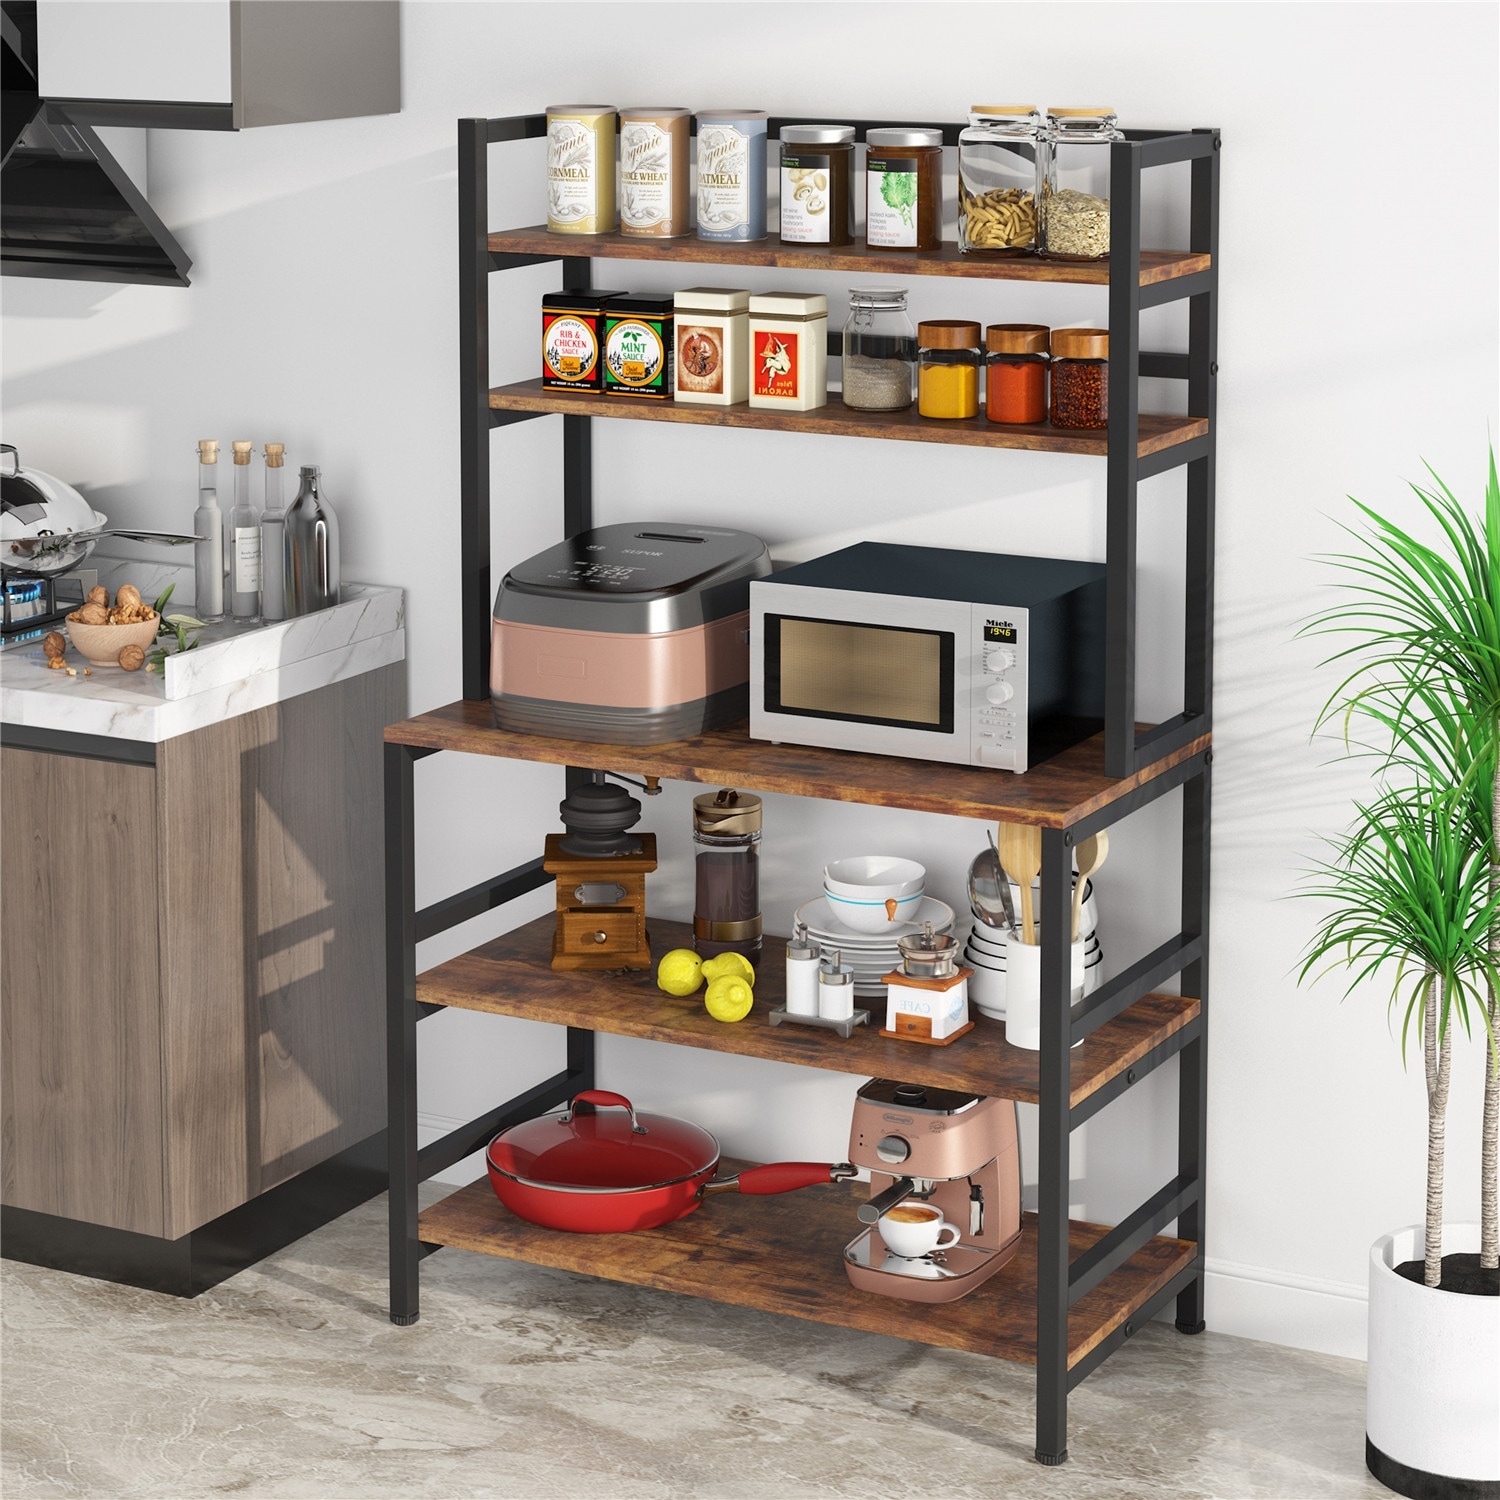 https://ak1.ostkcdn.com/images/products/is/images/direct/44b6c1e0fc9dd9844ea173f5dc83afab1f37532a/5-Tier-Industrial-Kitchen-Baker%27s-Rack-Microwave-Stand-Utility.jpg